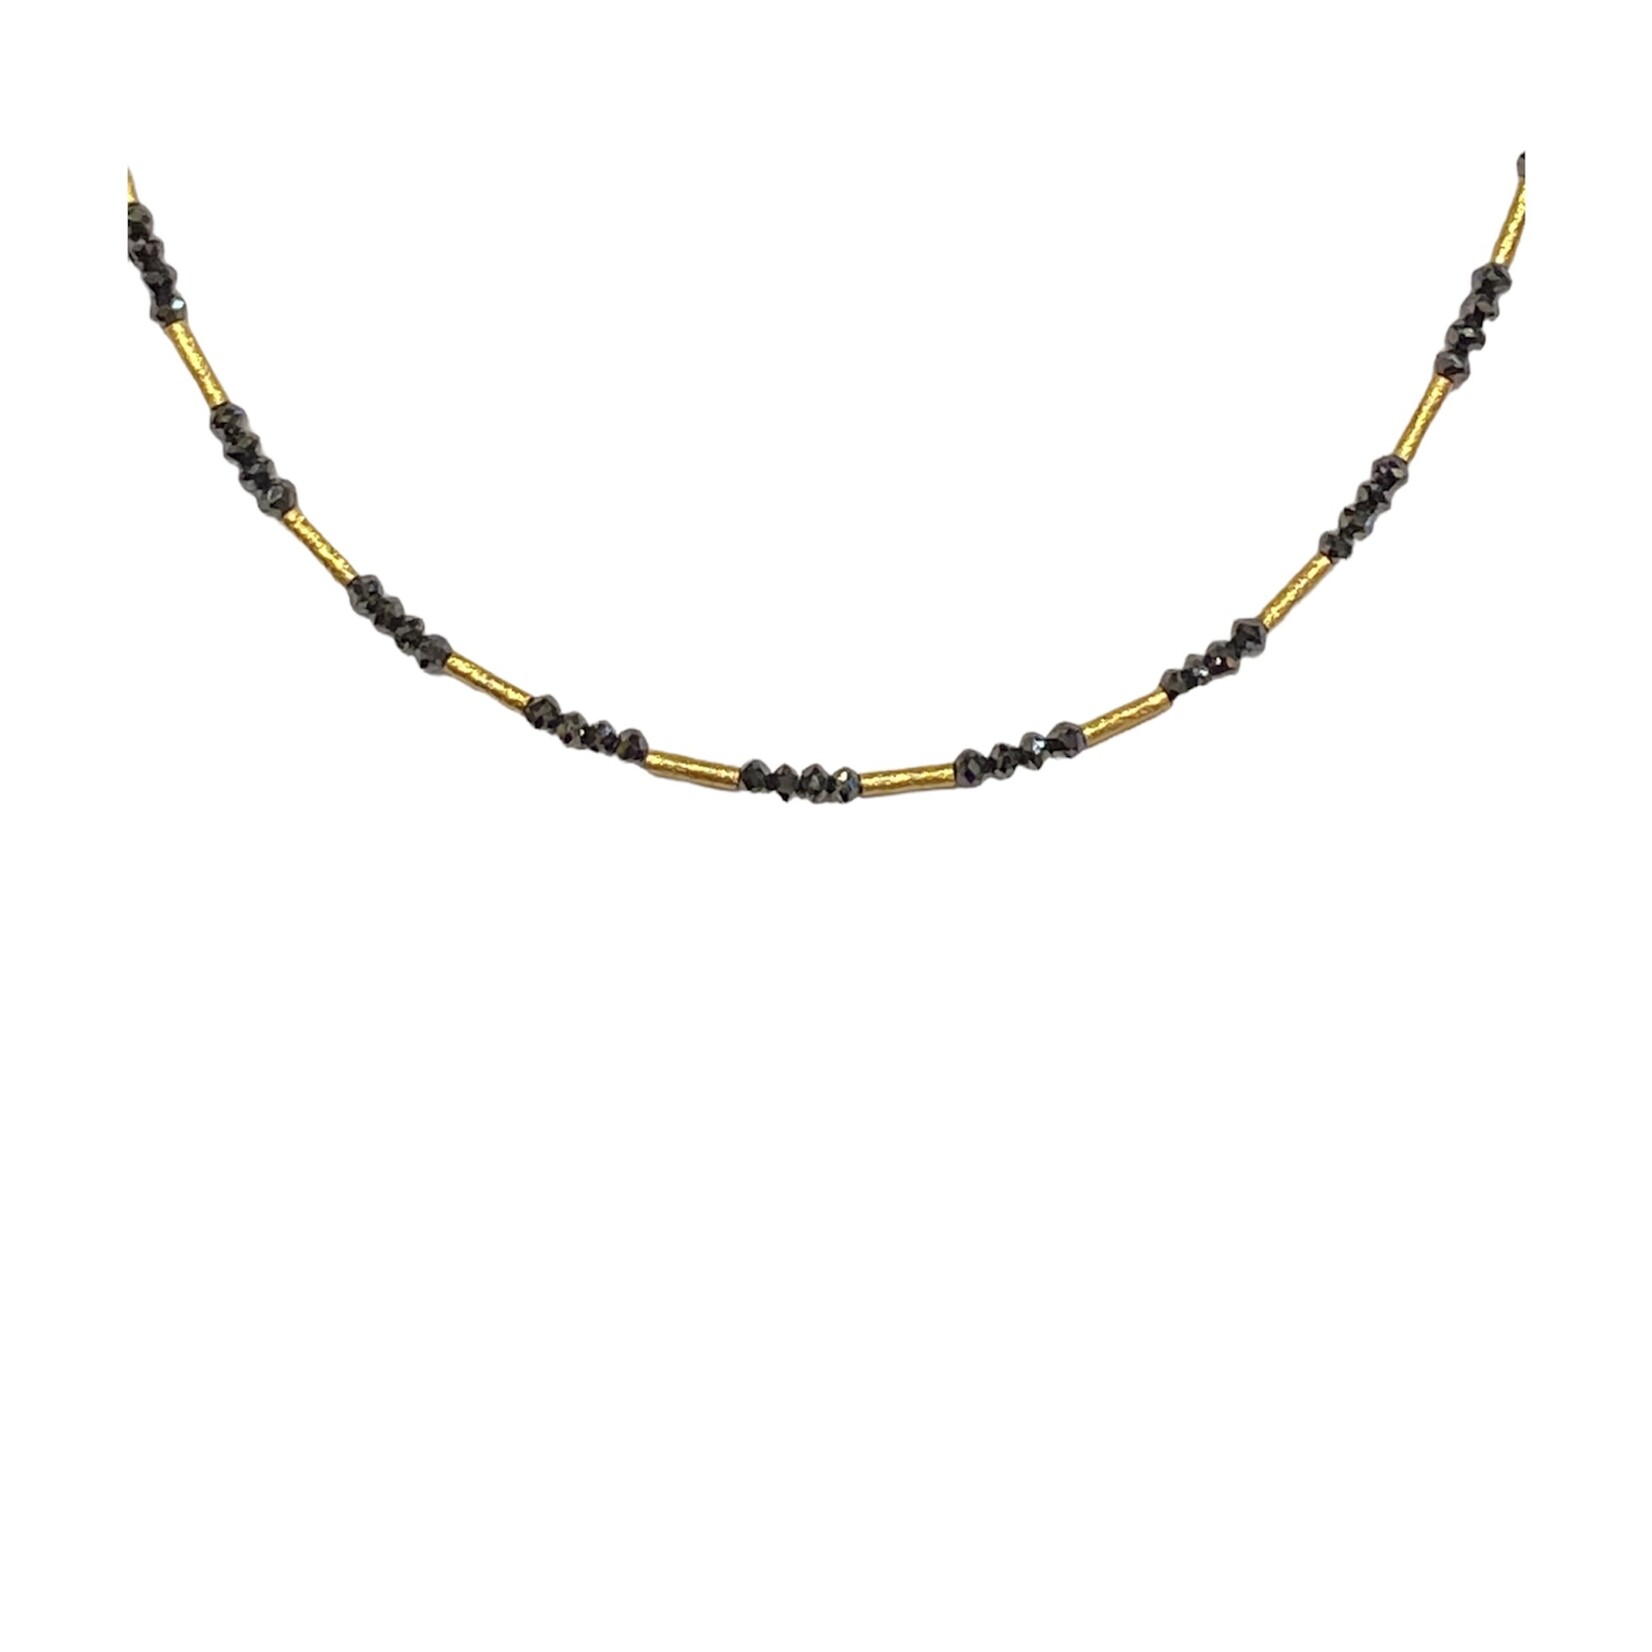 ARA Collection 24k and Black Diamond Necklace